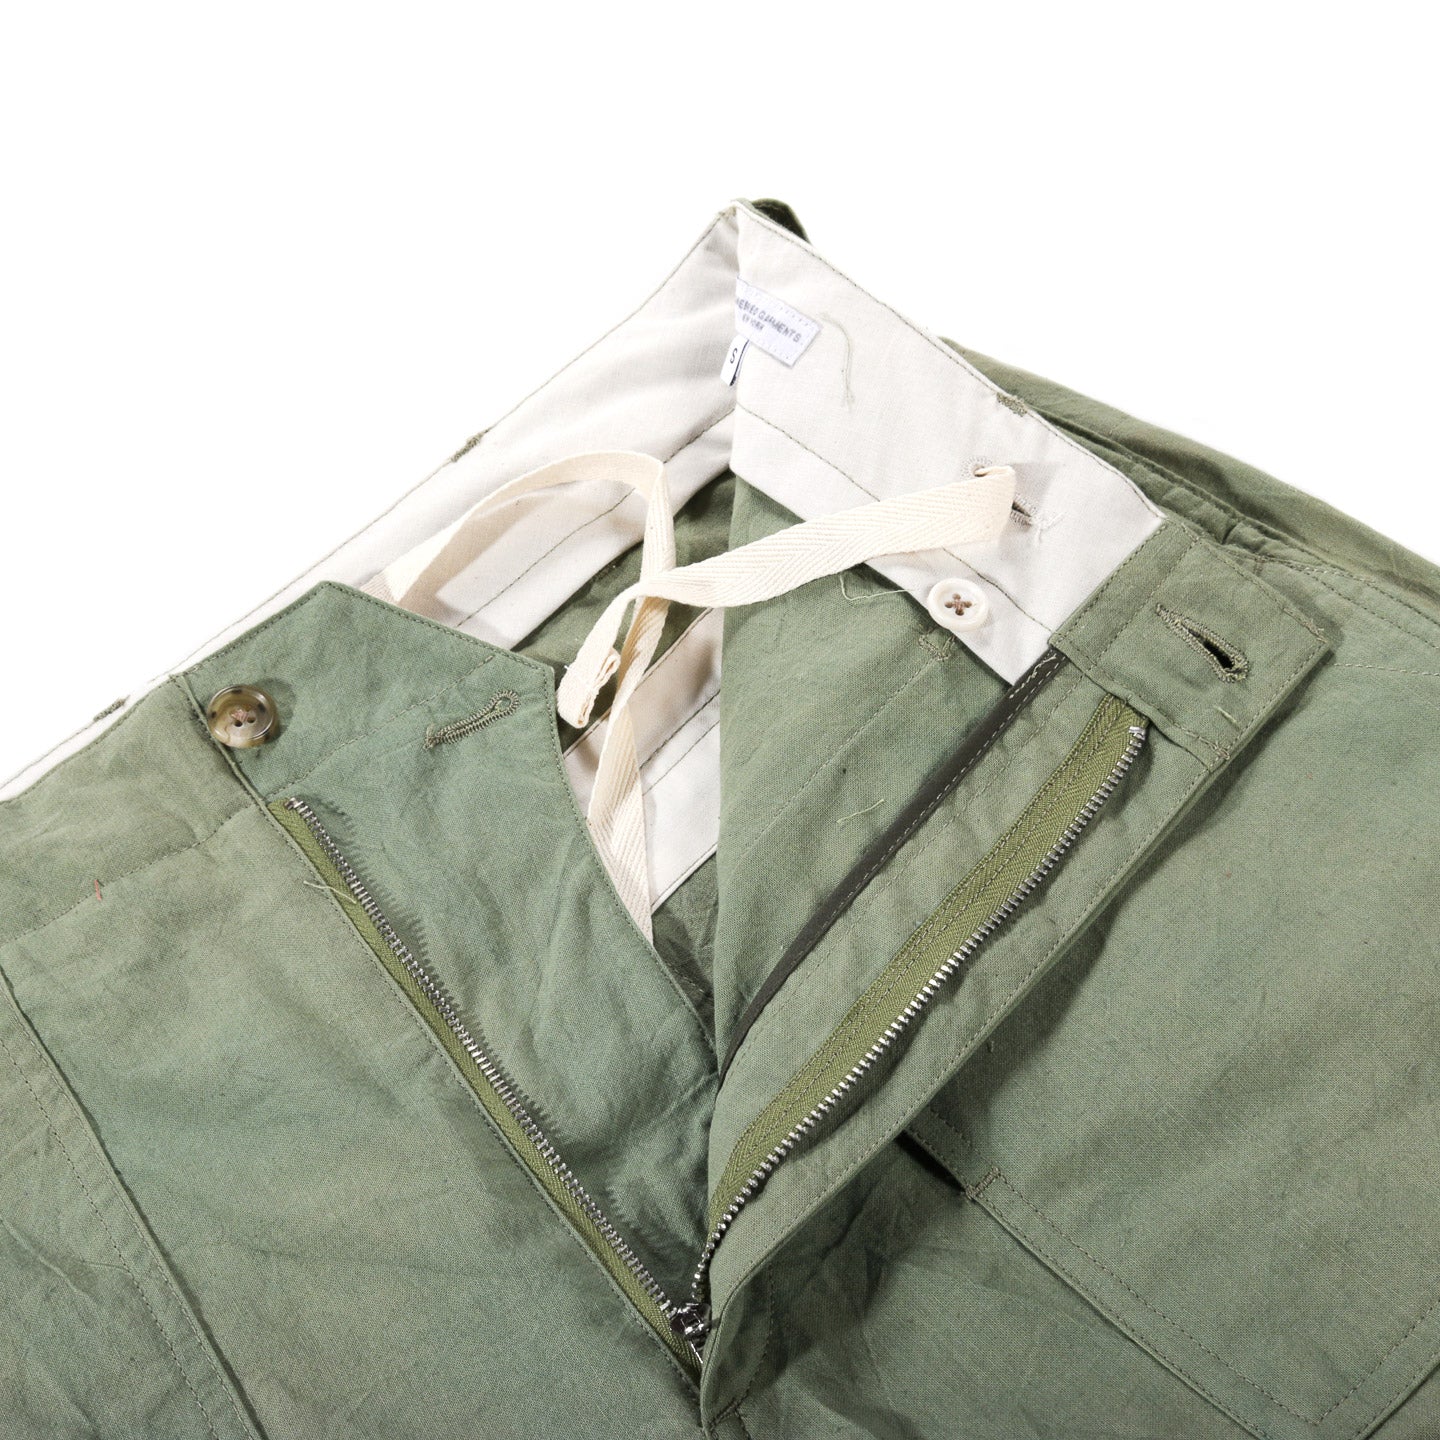 ENGINEERED GARMENTS FATIGUE SHORT OLIVE COTTON SHEETING